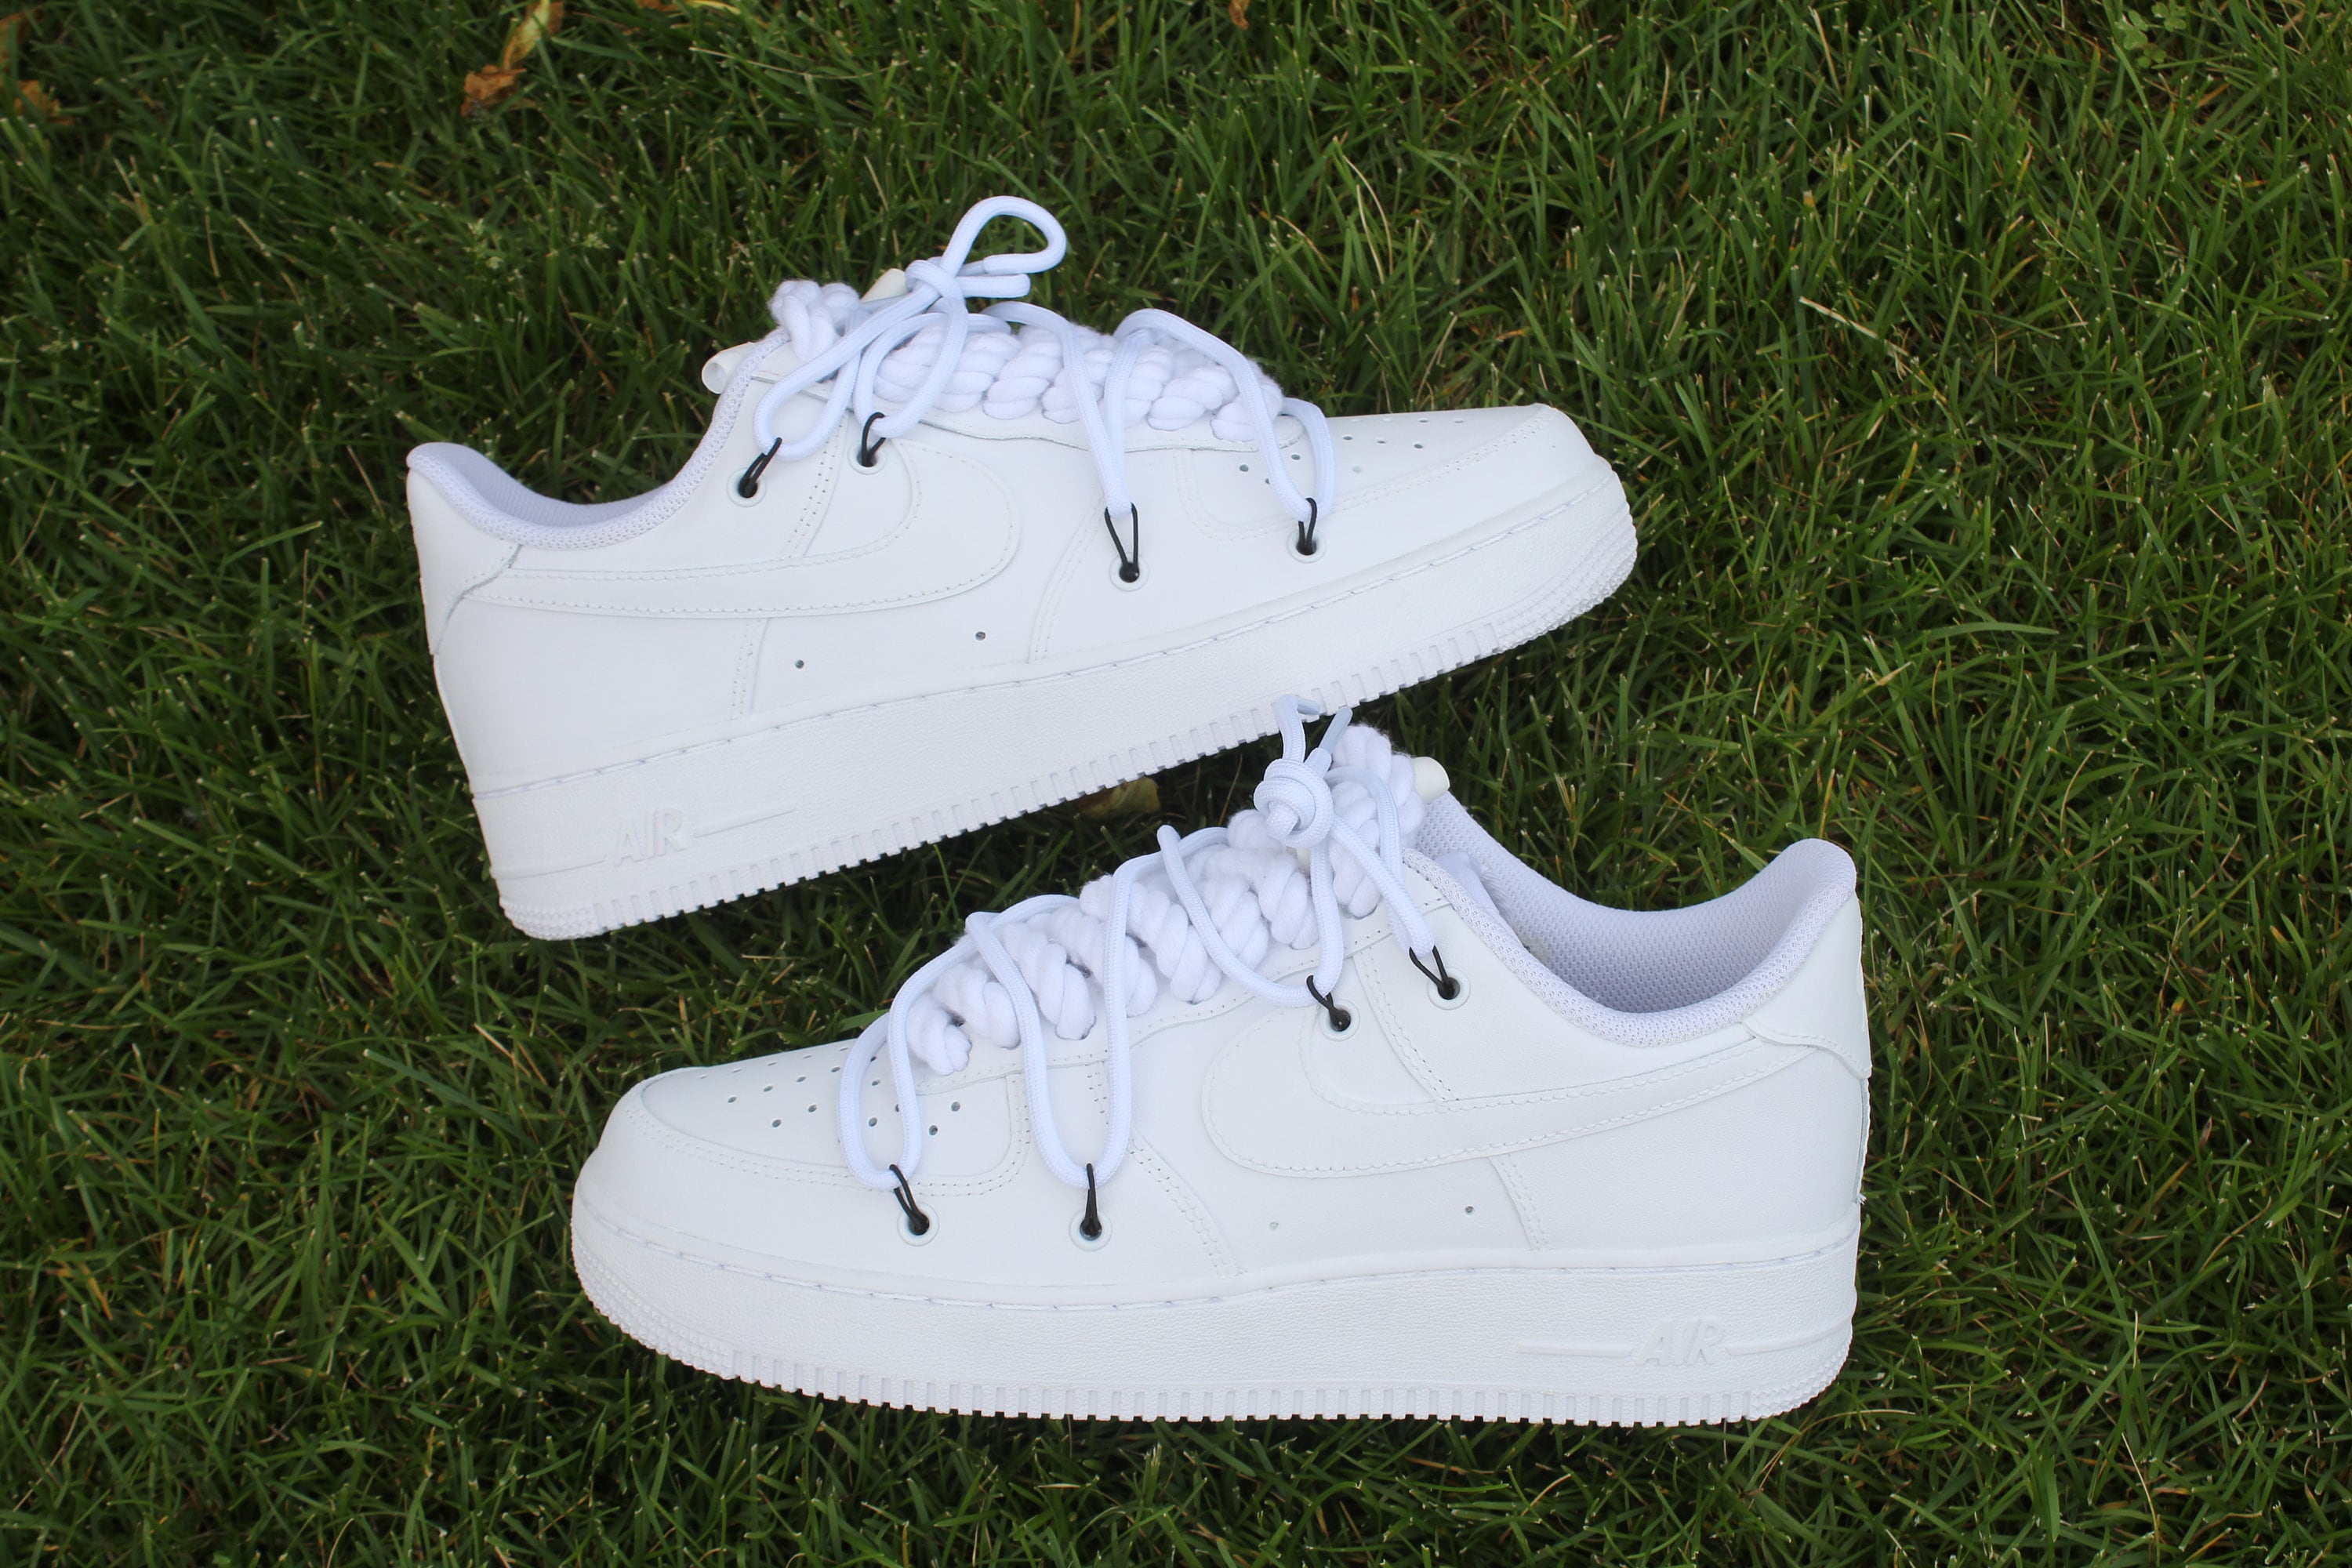 Air force 1 rope laces white – Kosmo studio